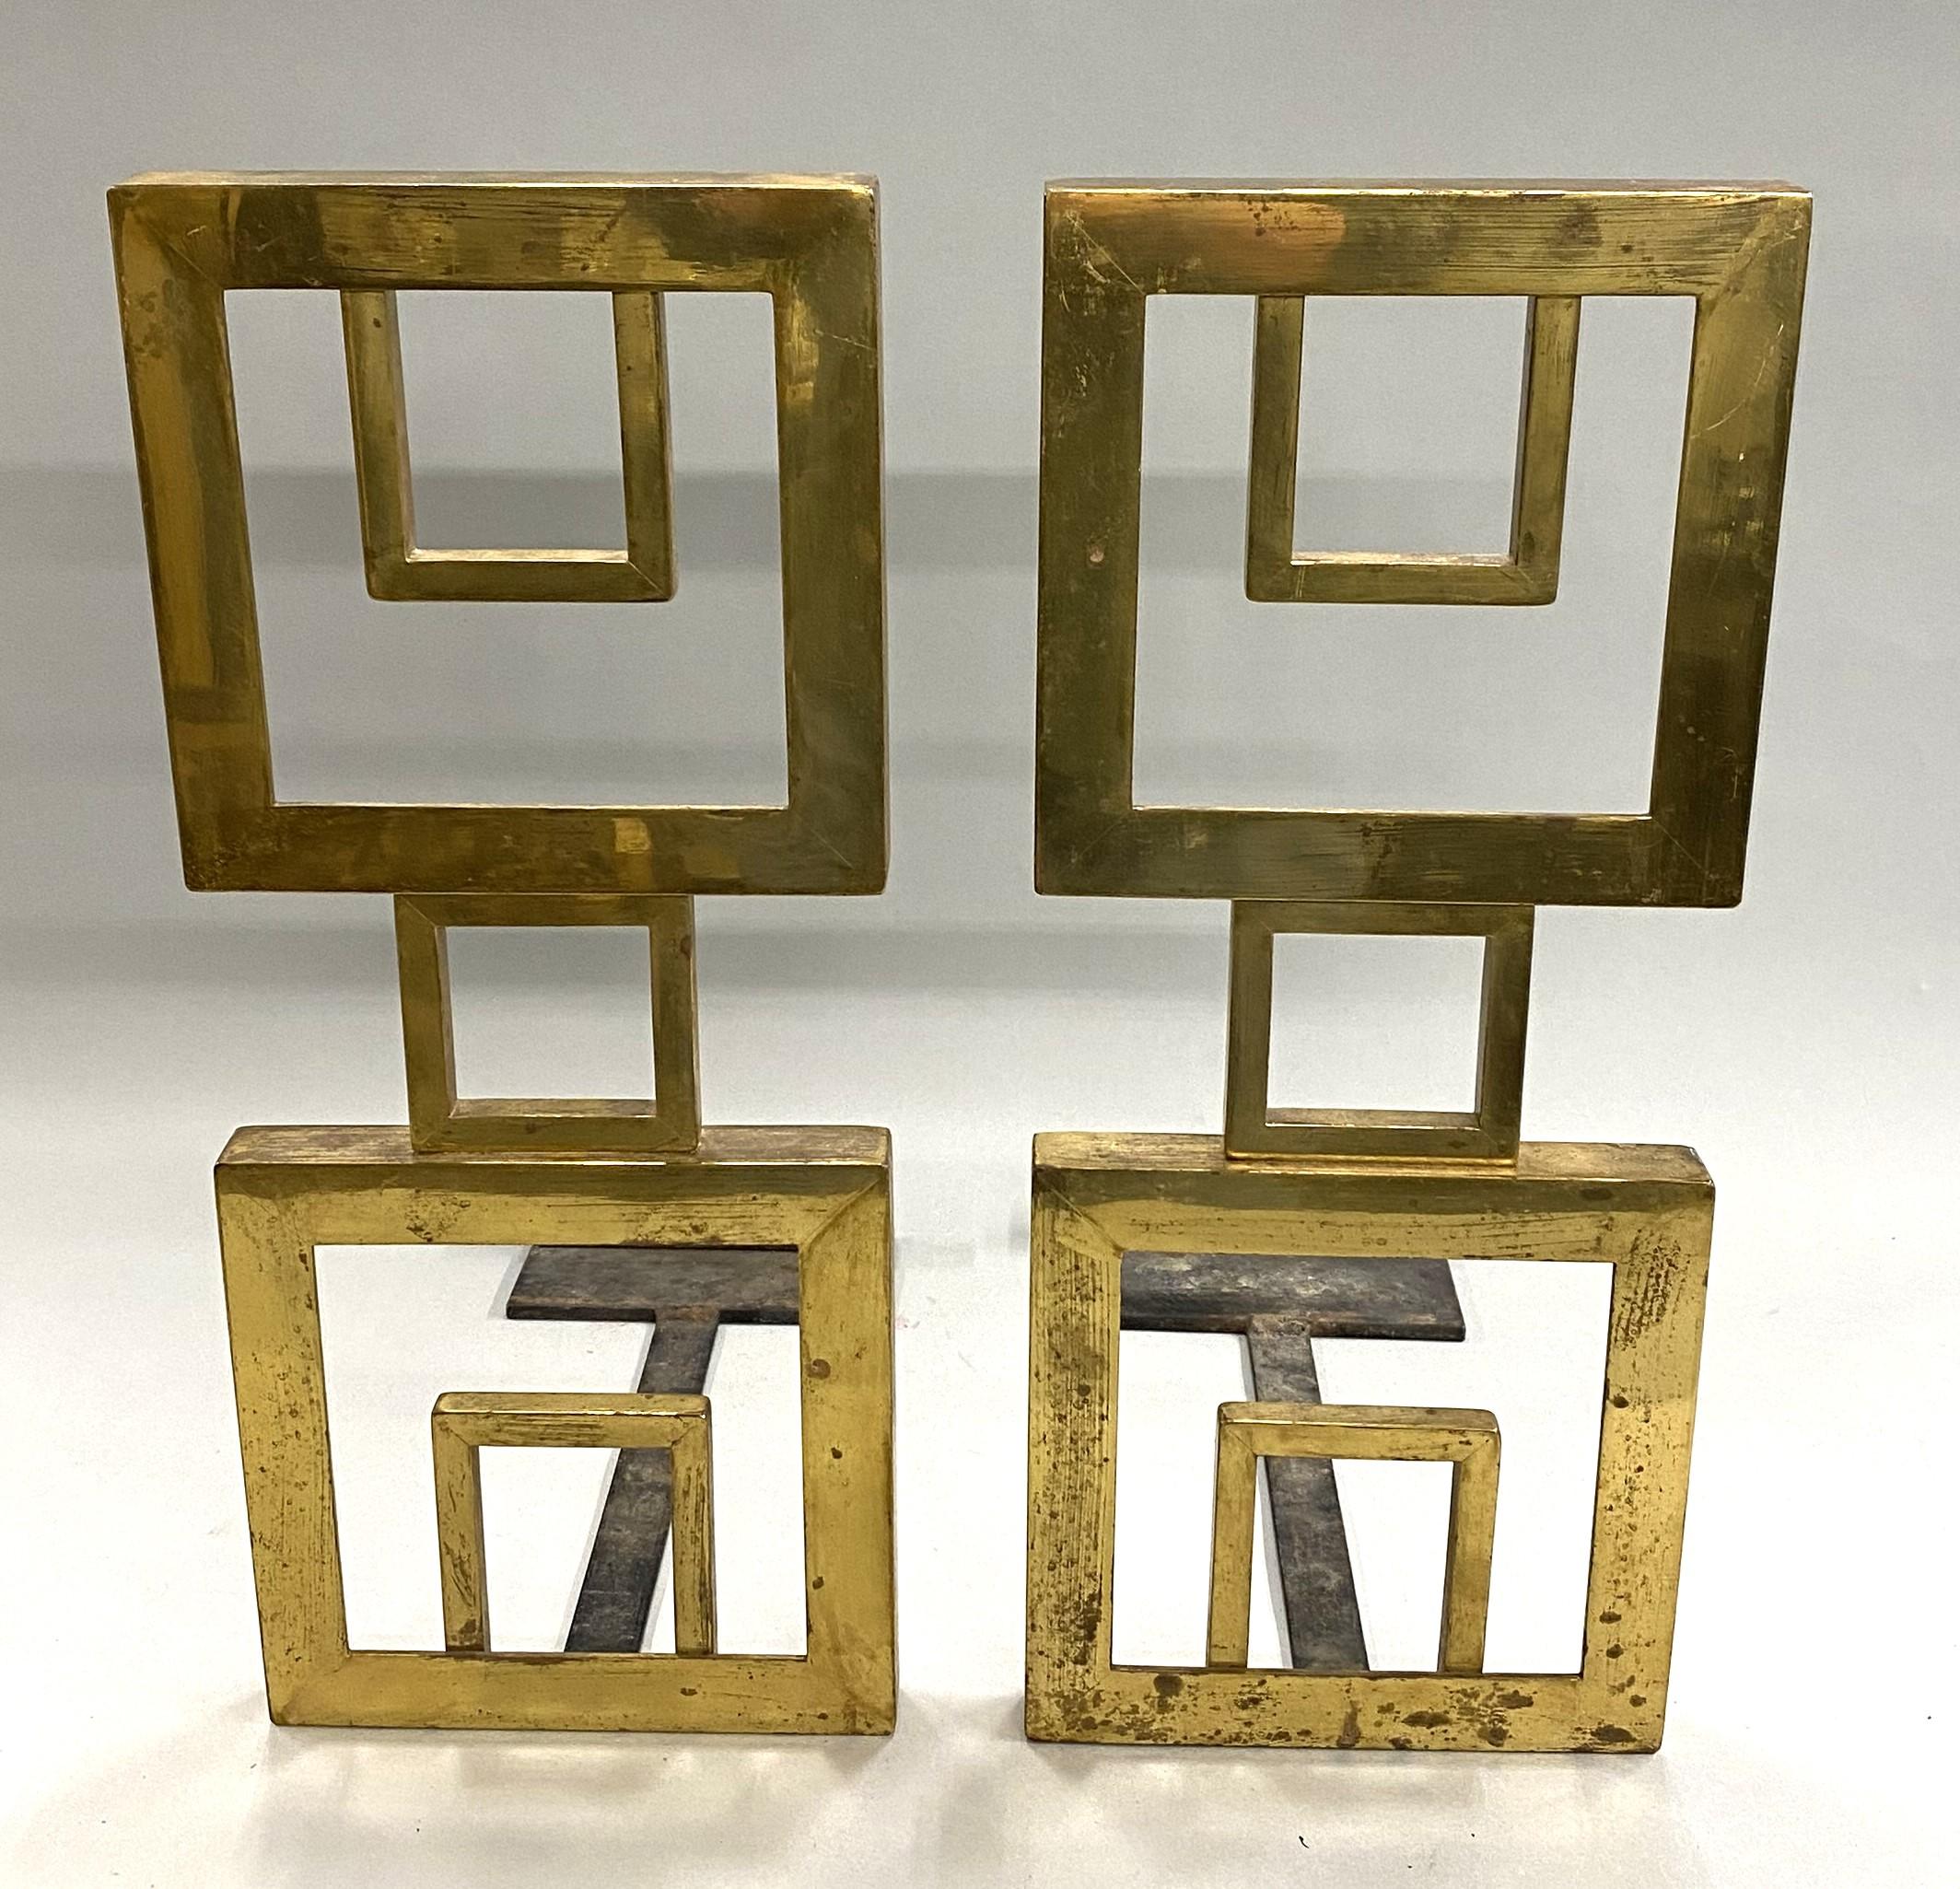 A fine pair of unsigned Mid Century Modern bronze geometric andirons with squares within squares, in brass finish with black iron dogs in very good condition, with some minor surface scratches, light rusting to dogs,  finish losses, imperfections,